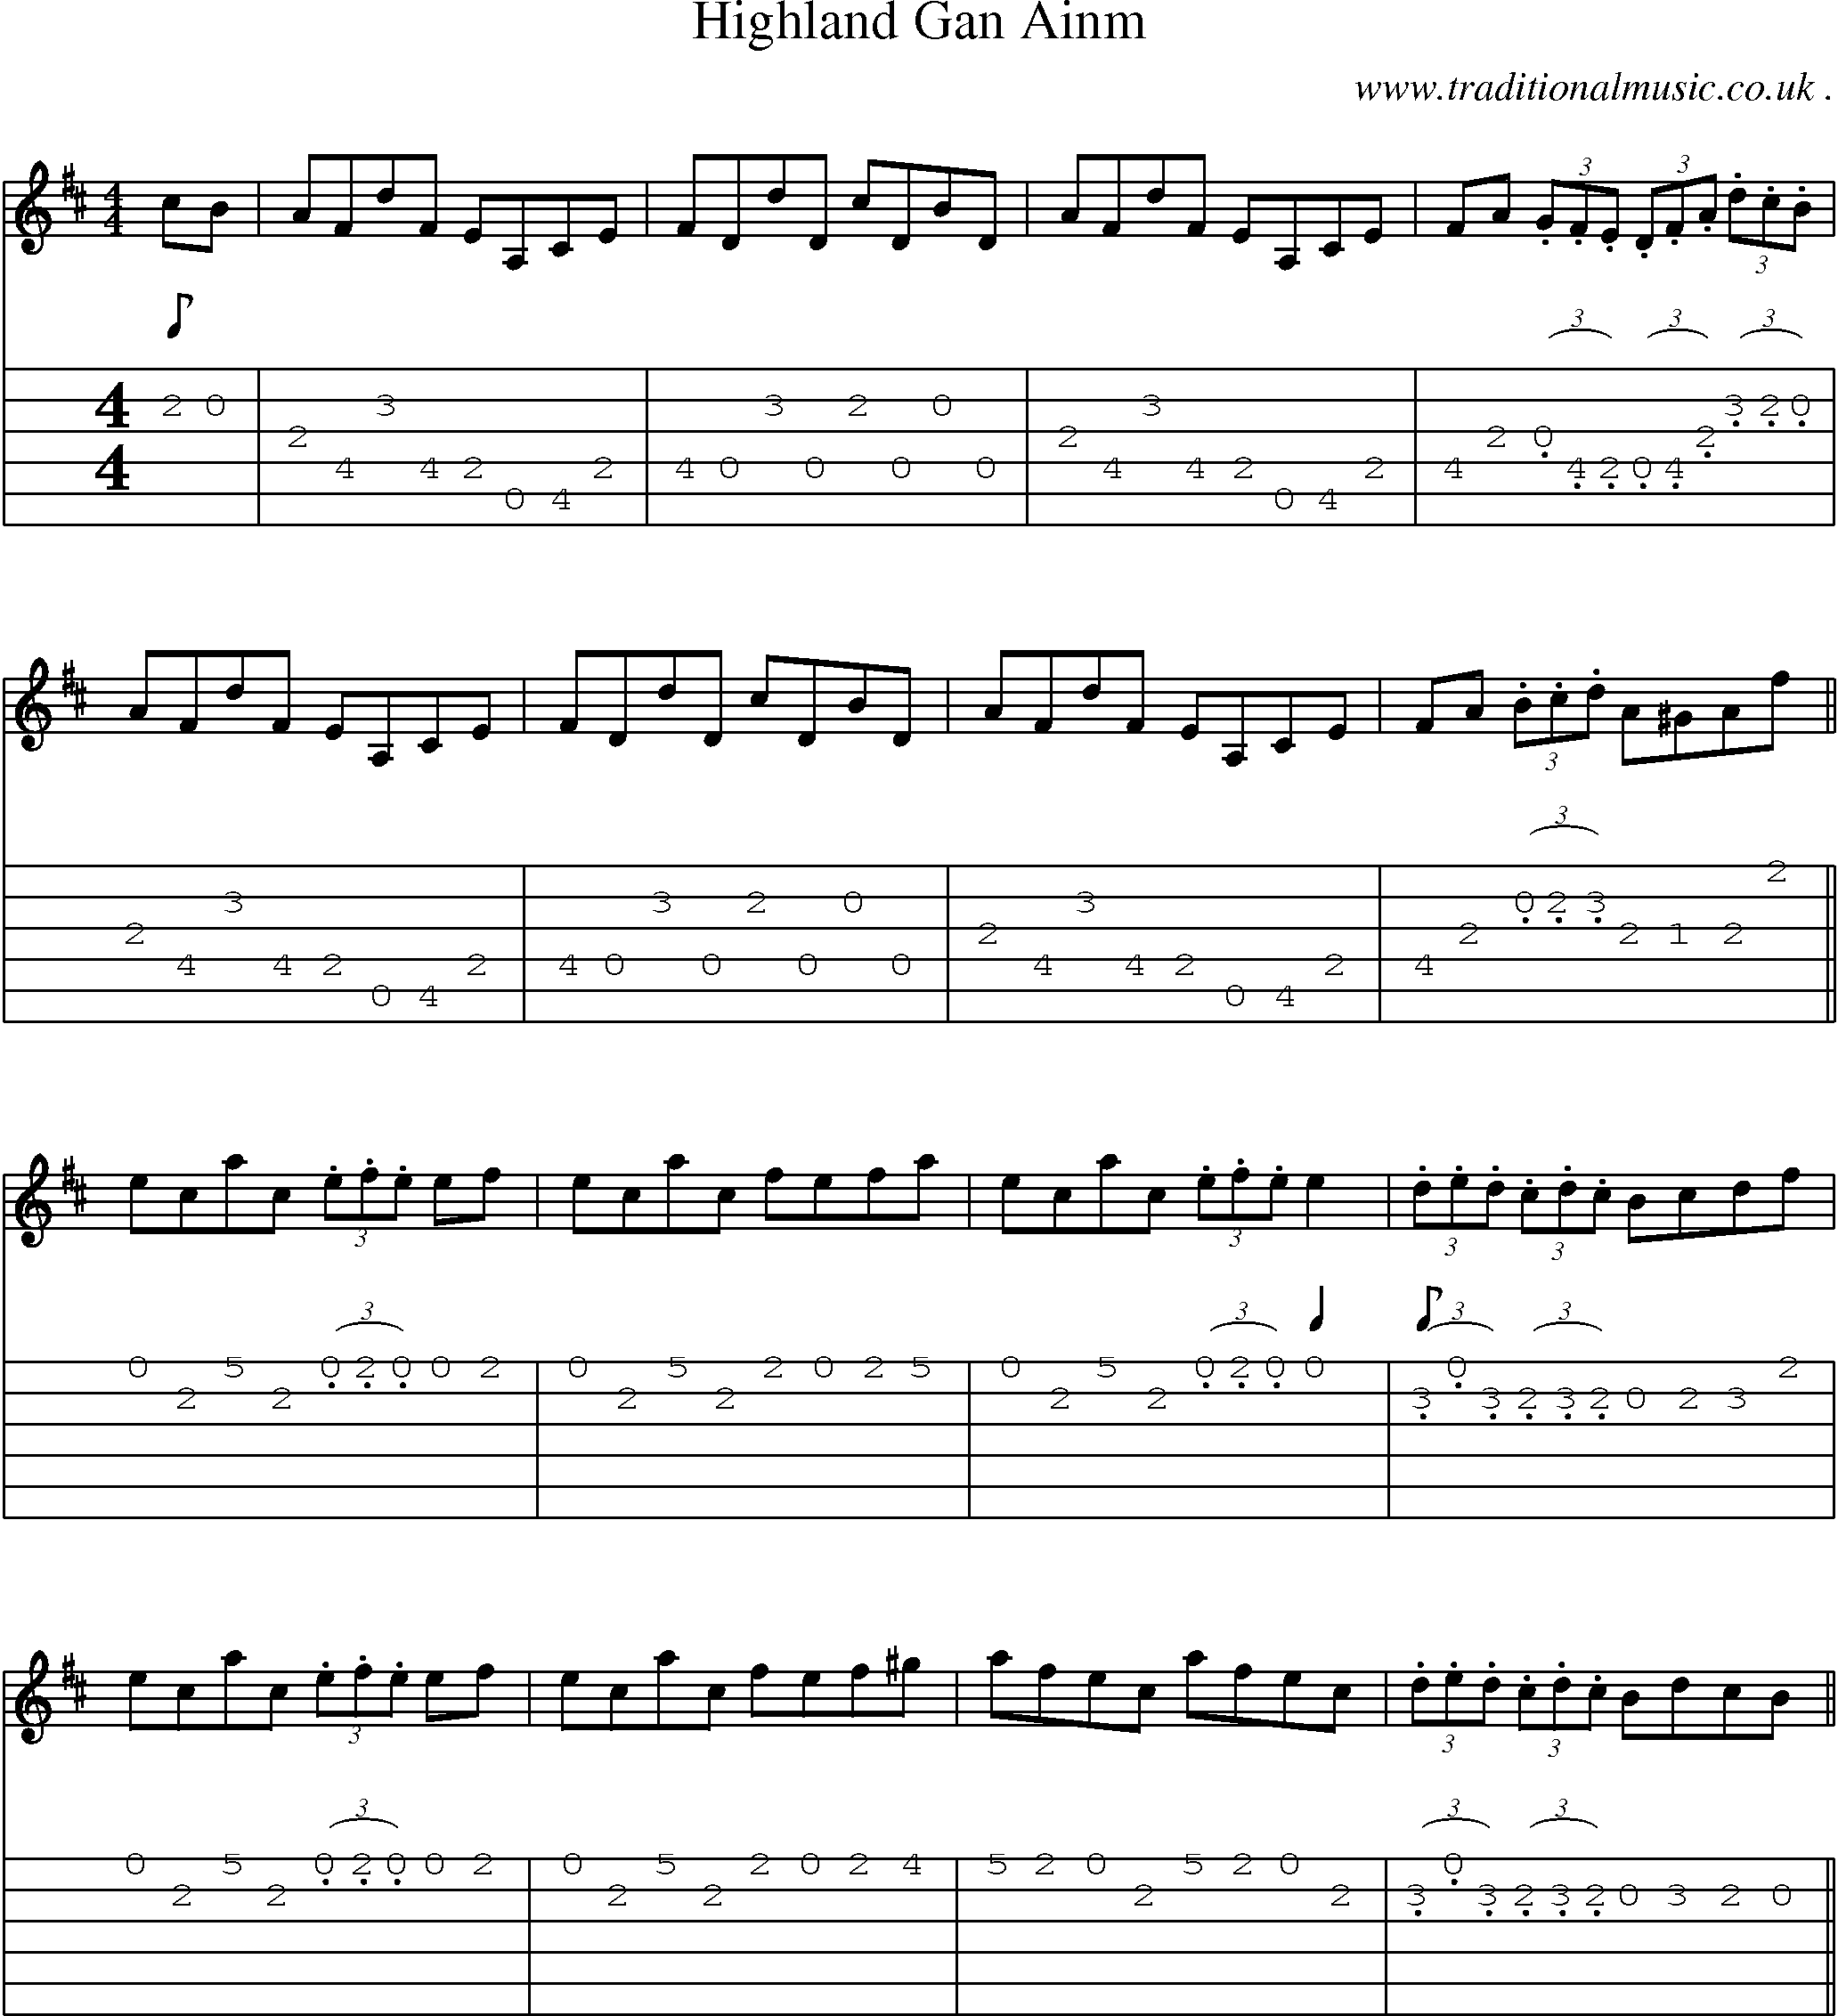 Sheet-Music and Guitar Tabs for Highland Gan Ainm